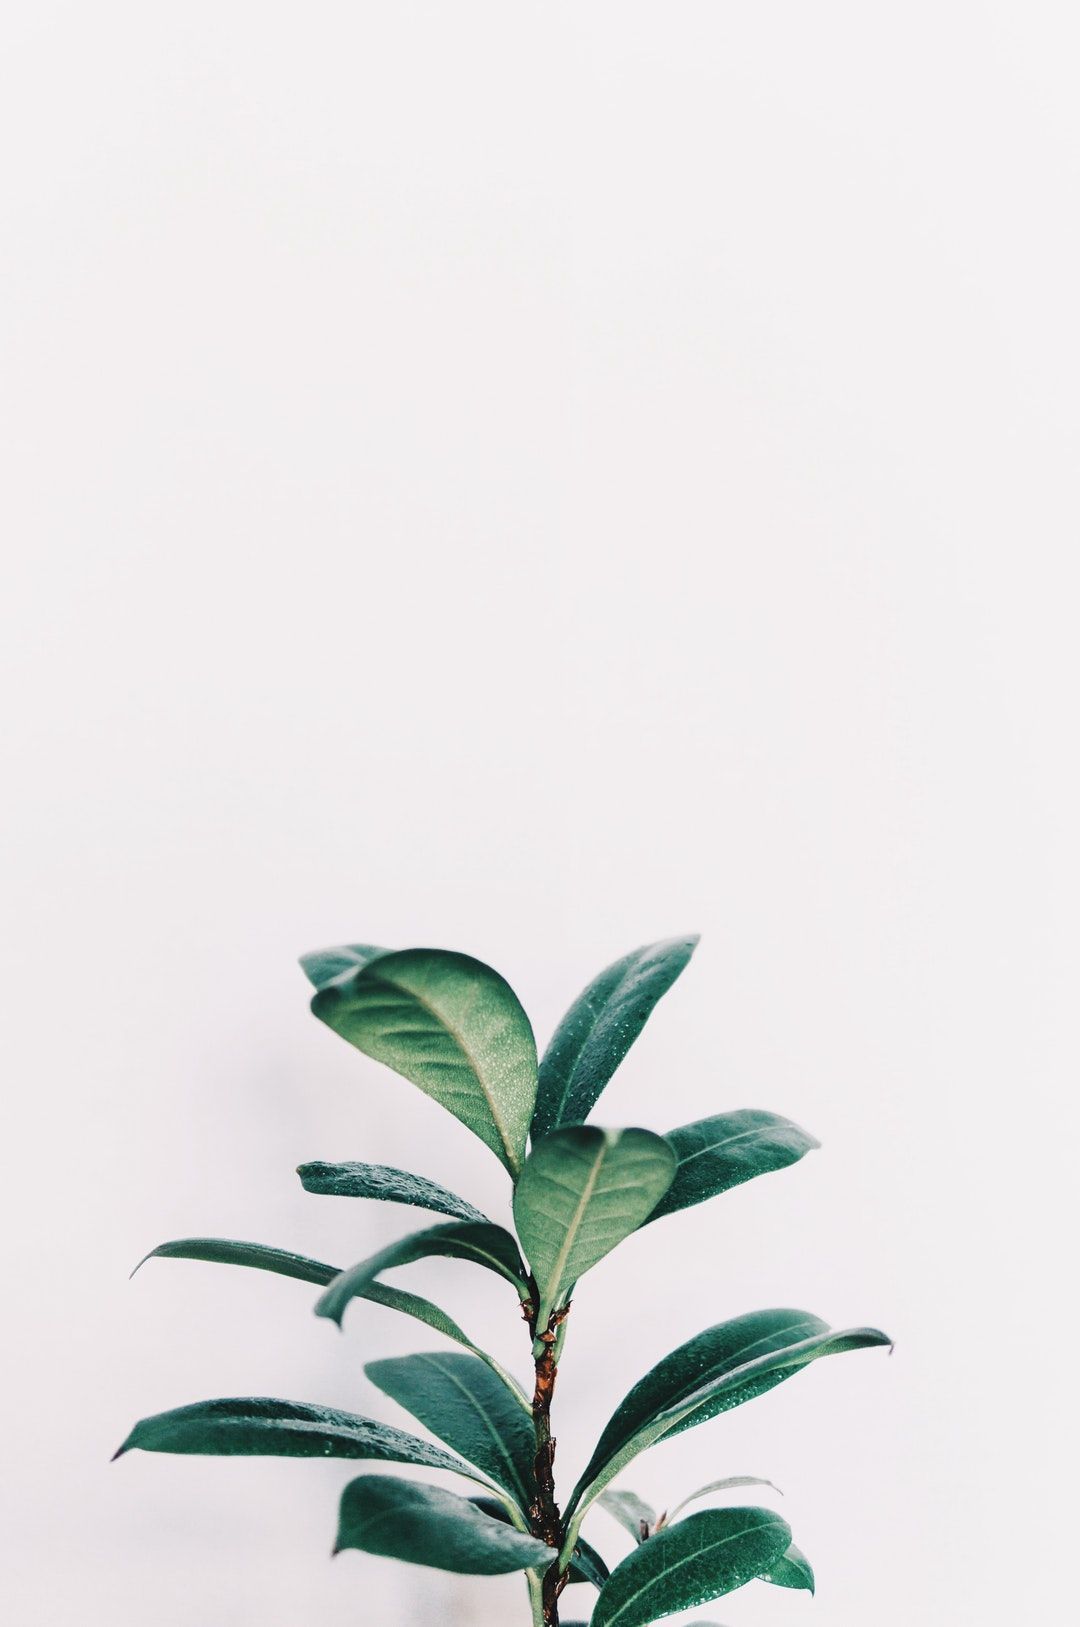 iPhone wallpapers  19 best free iphone wallpaper plant wallpaper and  grey photos on Unsplash